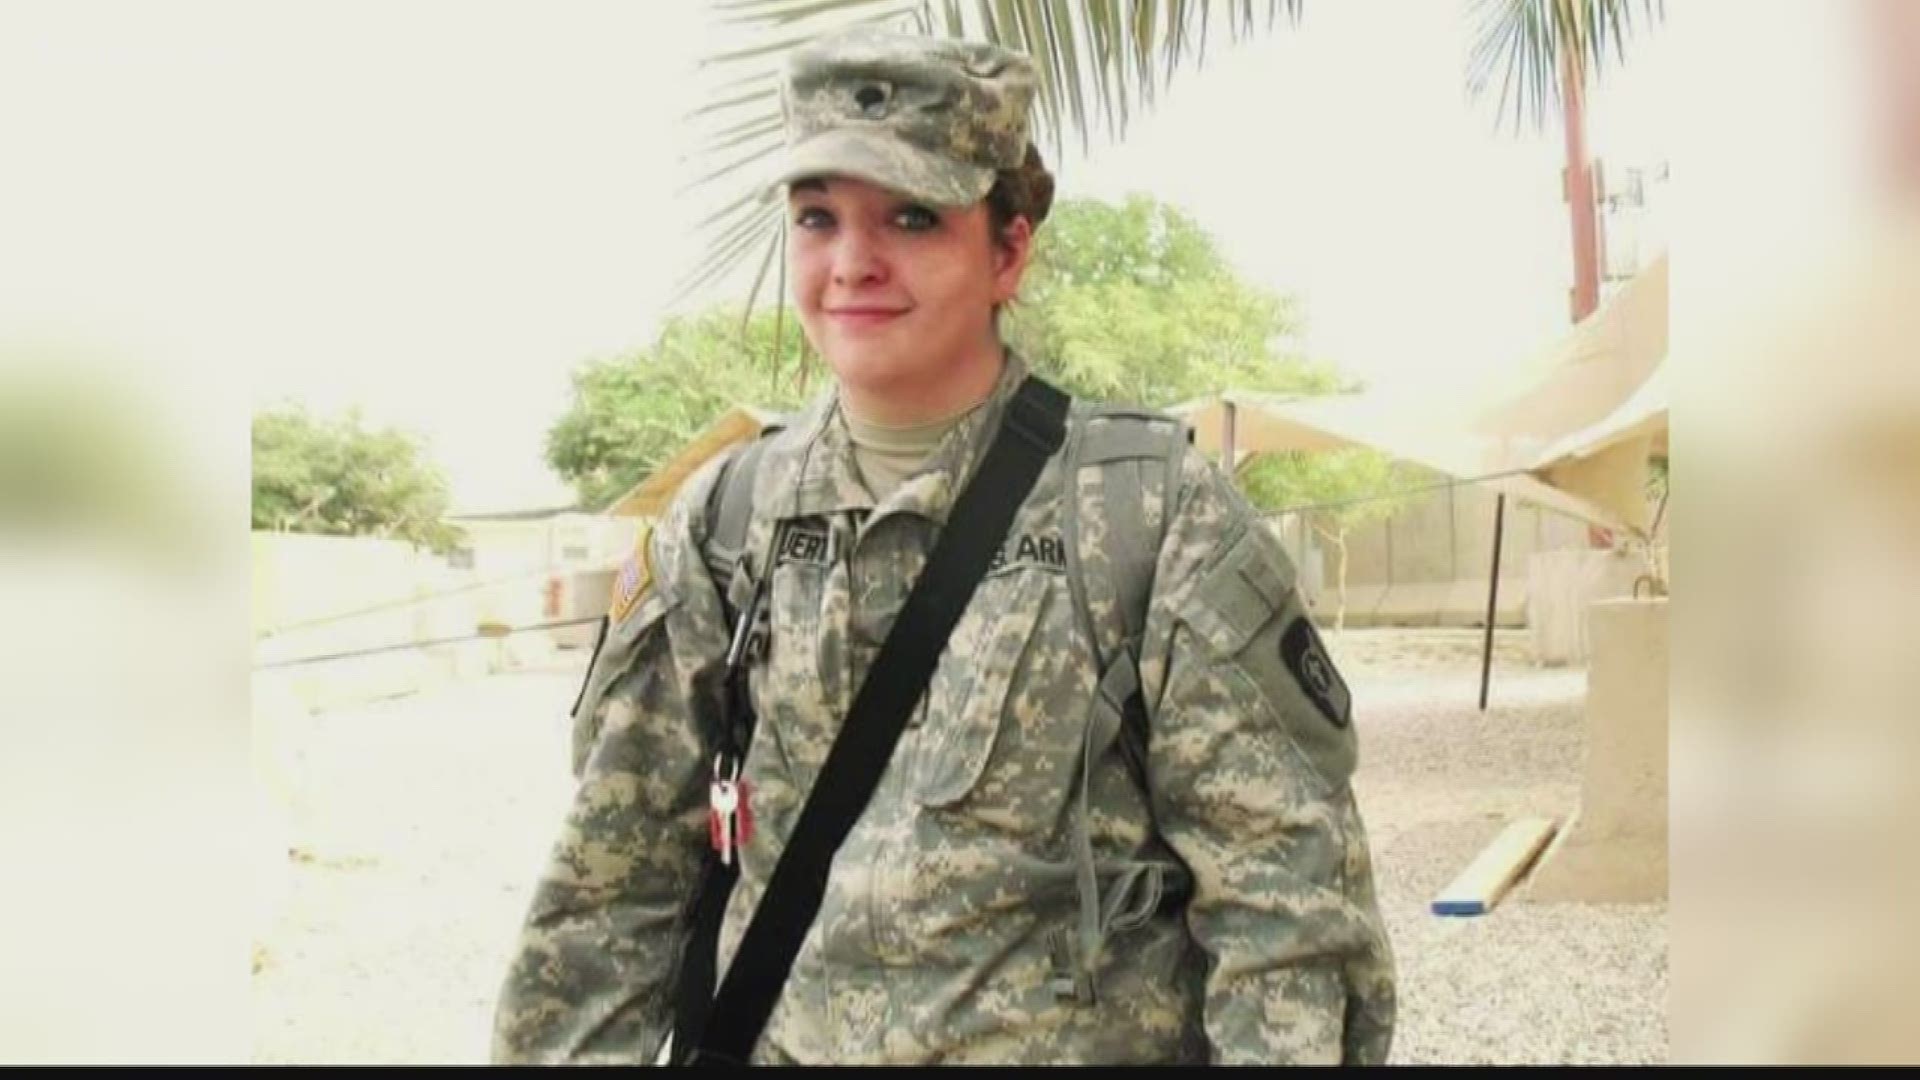 A Warner Robins Army and Air Force veteran says mistakes made by the Dublin VA are endangering her health. She said she's worried that what she calls 'substandard care' will cause her symptoms to get worse before she gets help.